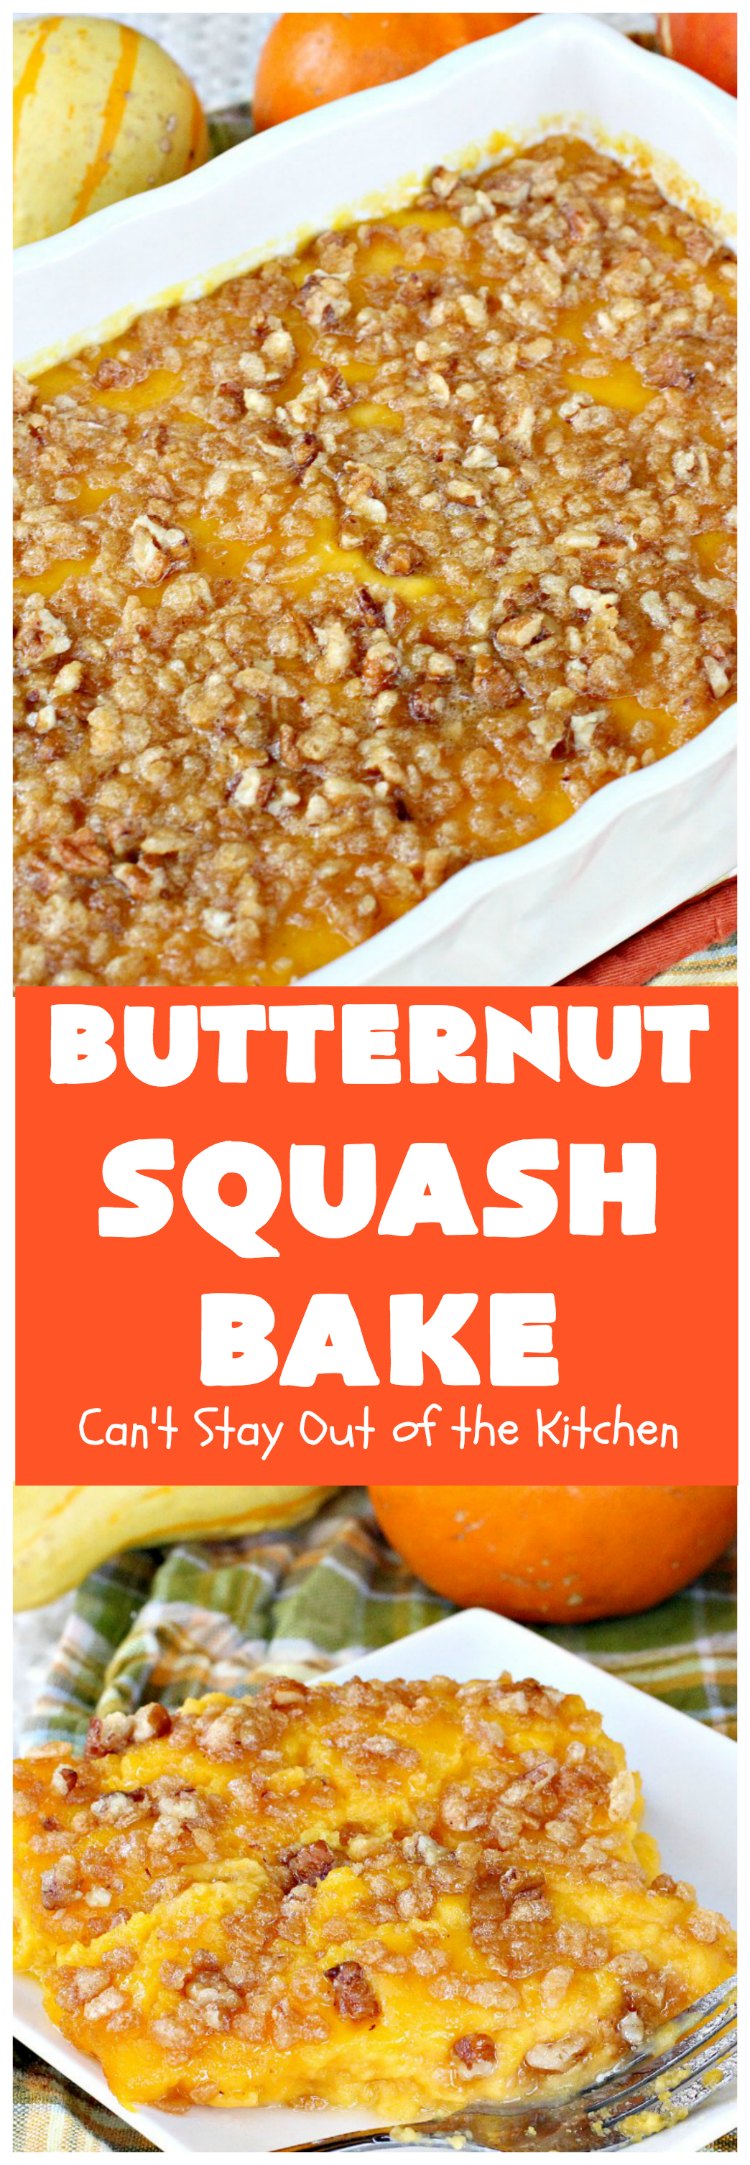 Butternut Squash Bake | Can't Stay Out of the Kitchen